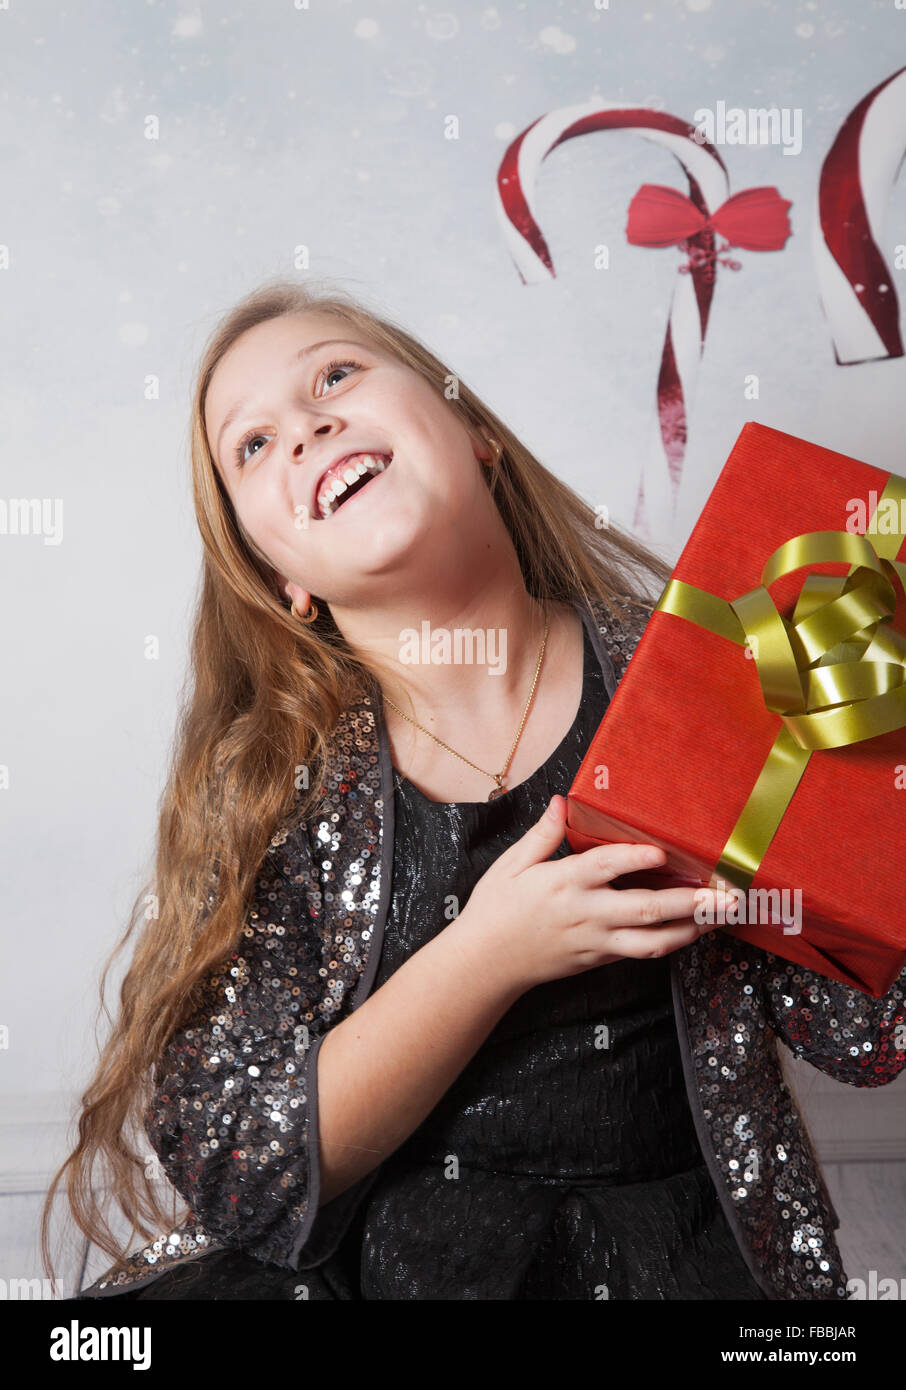 Portrait of a 10 year old girl, Christmas themed portrait, studio shot. Stock Photo